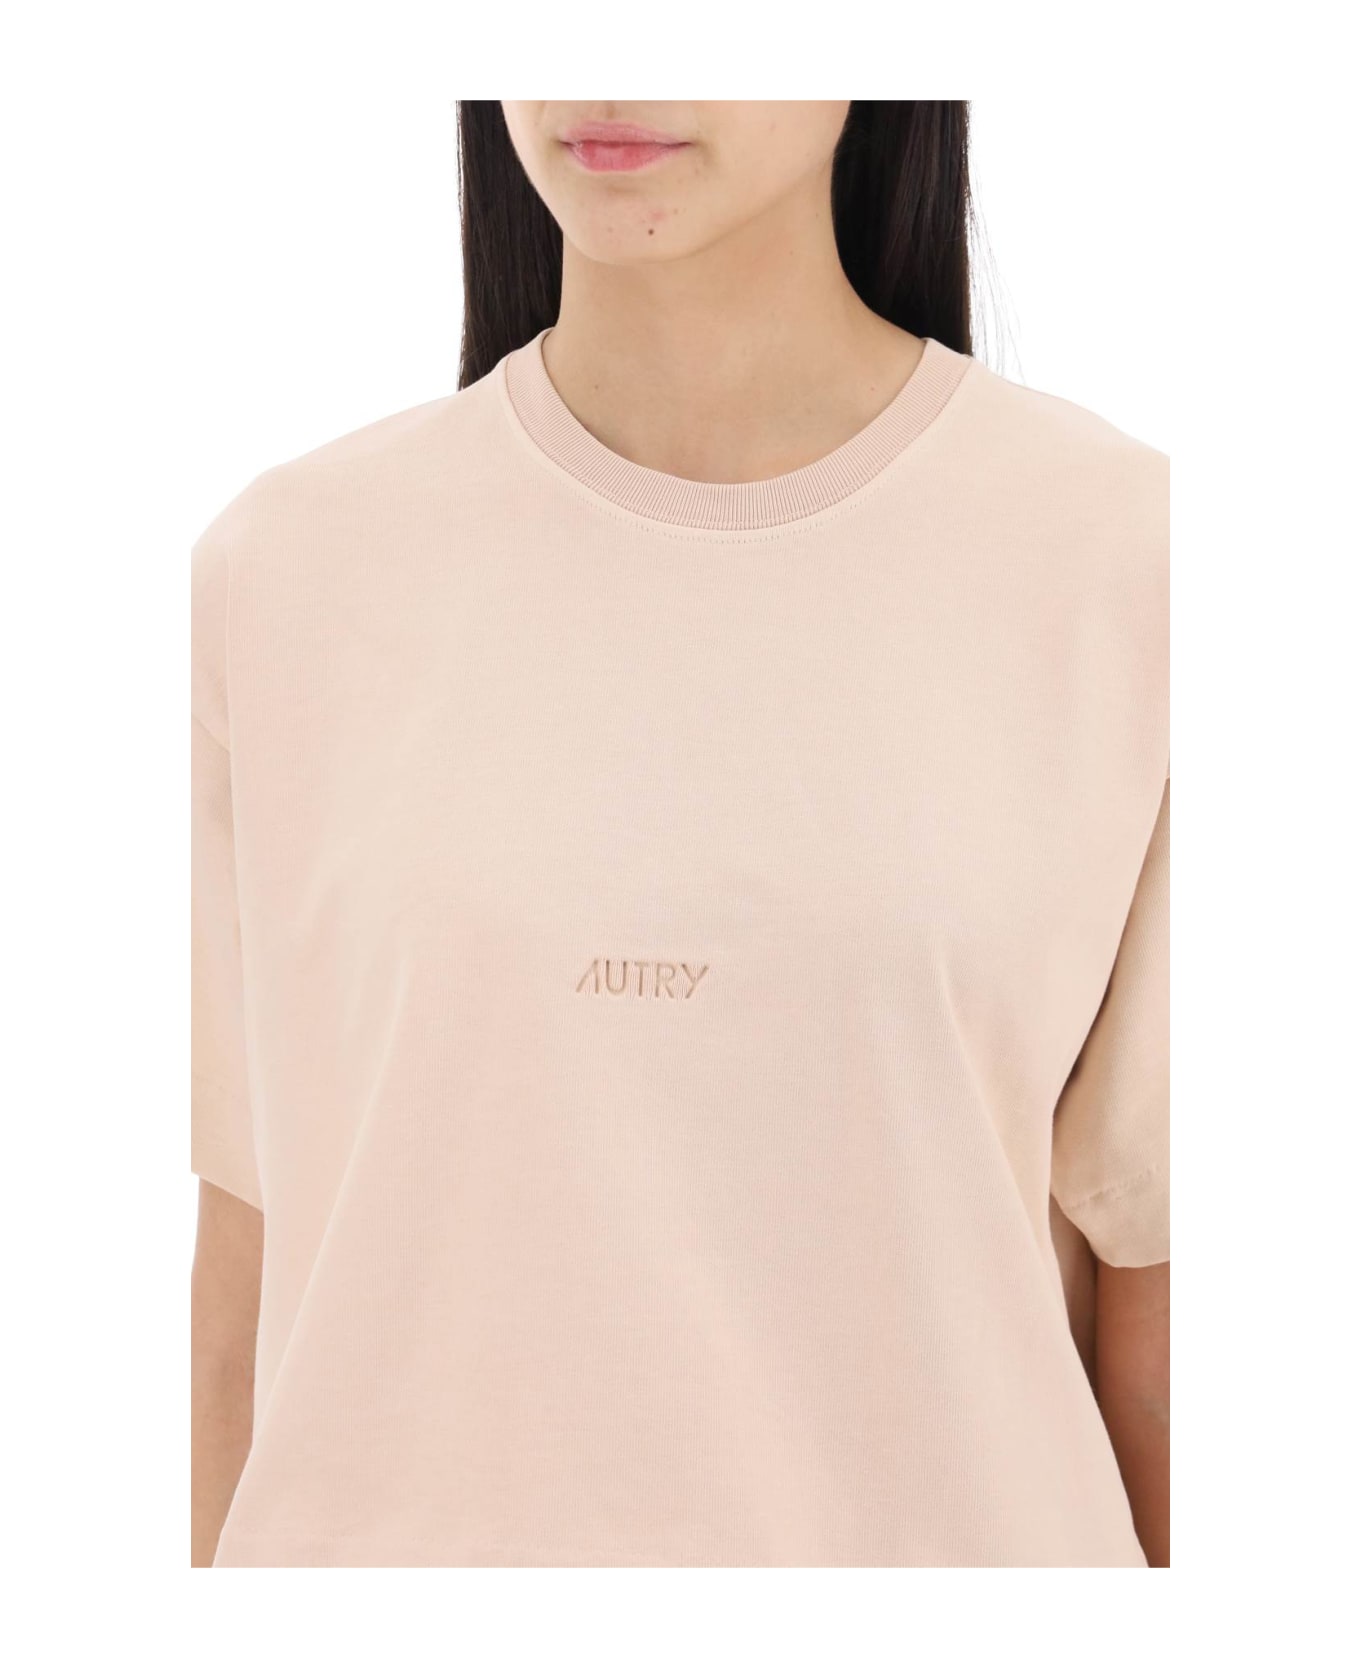 Autry Cotton T-shirt With Logo - PEONY ROSE (Pink) Tシャツ